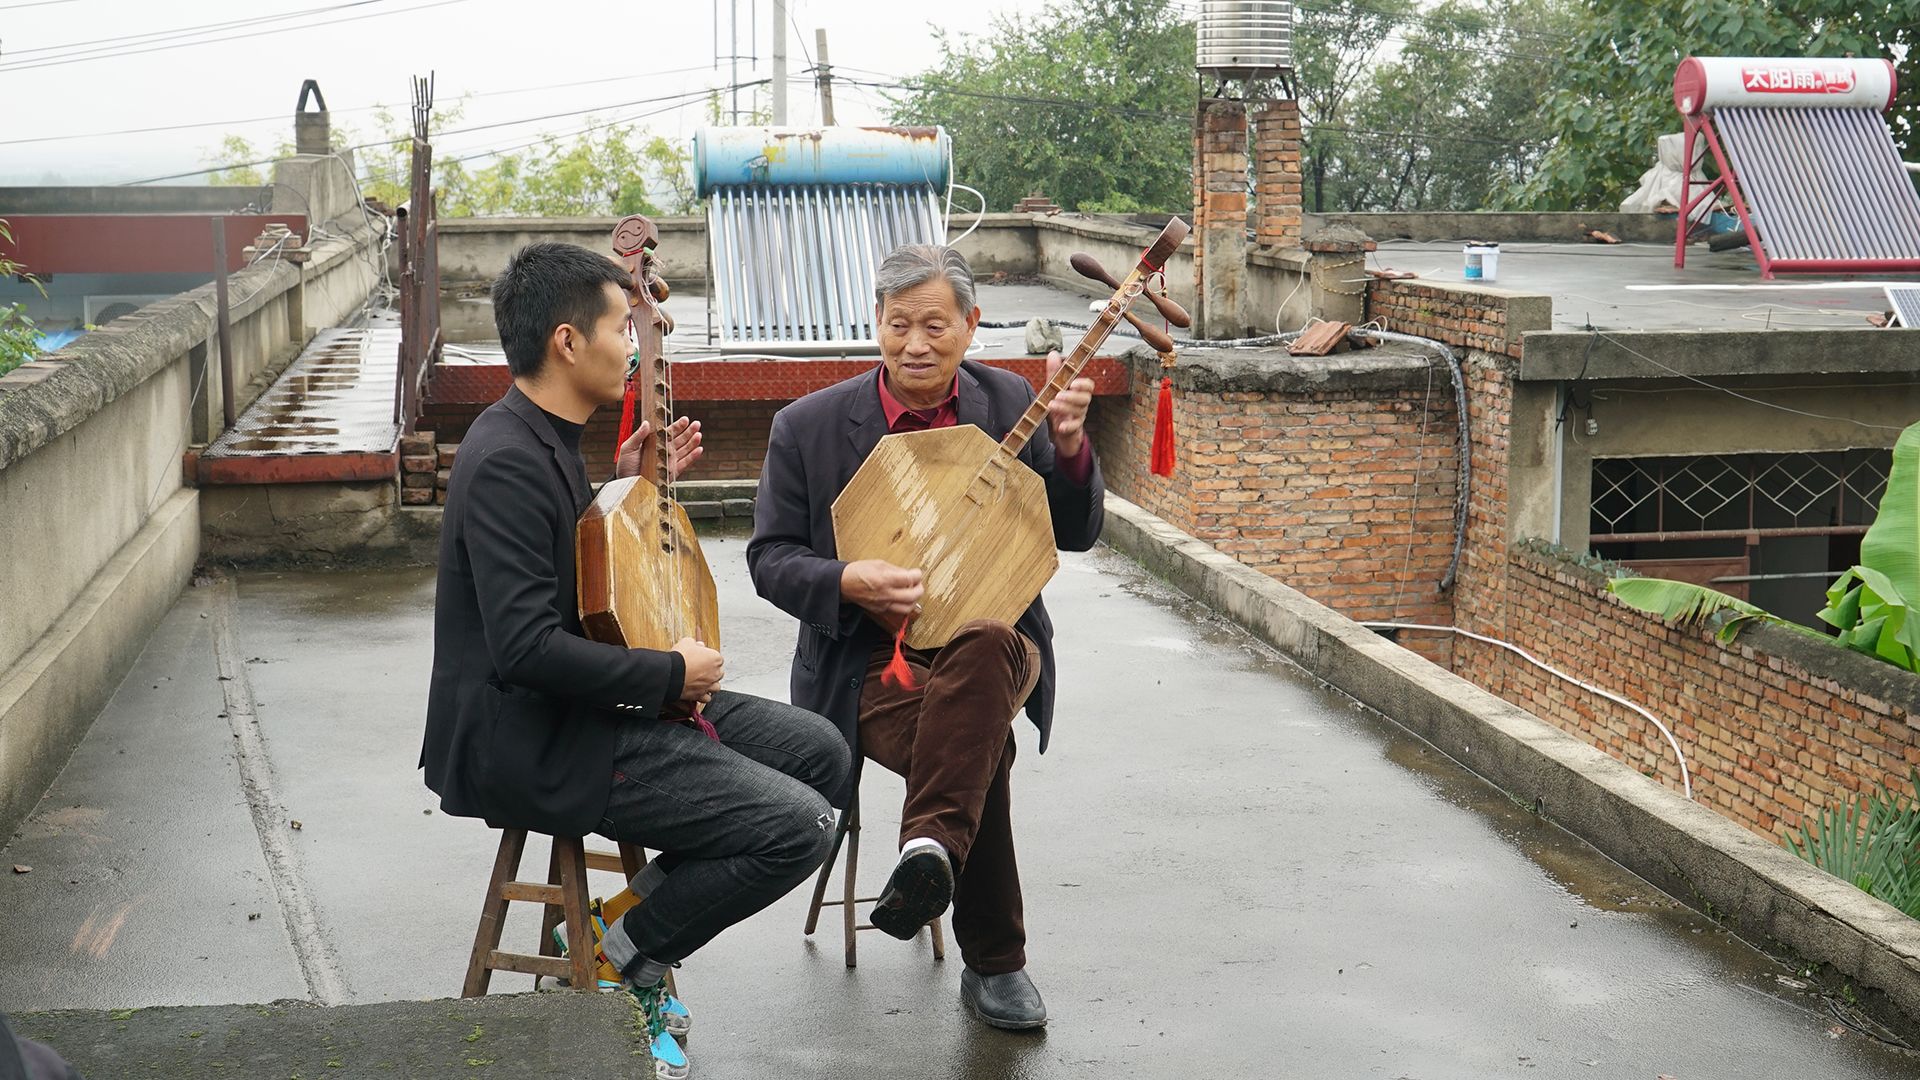 Zhang Ximin, and his grandson practice Huayin Laoqiang. This is from Tracing Heritage [Photo of the day - October 2021]